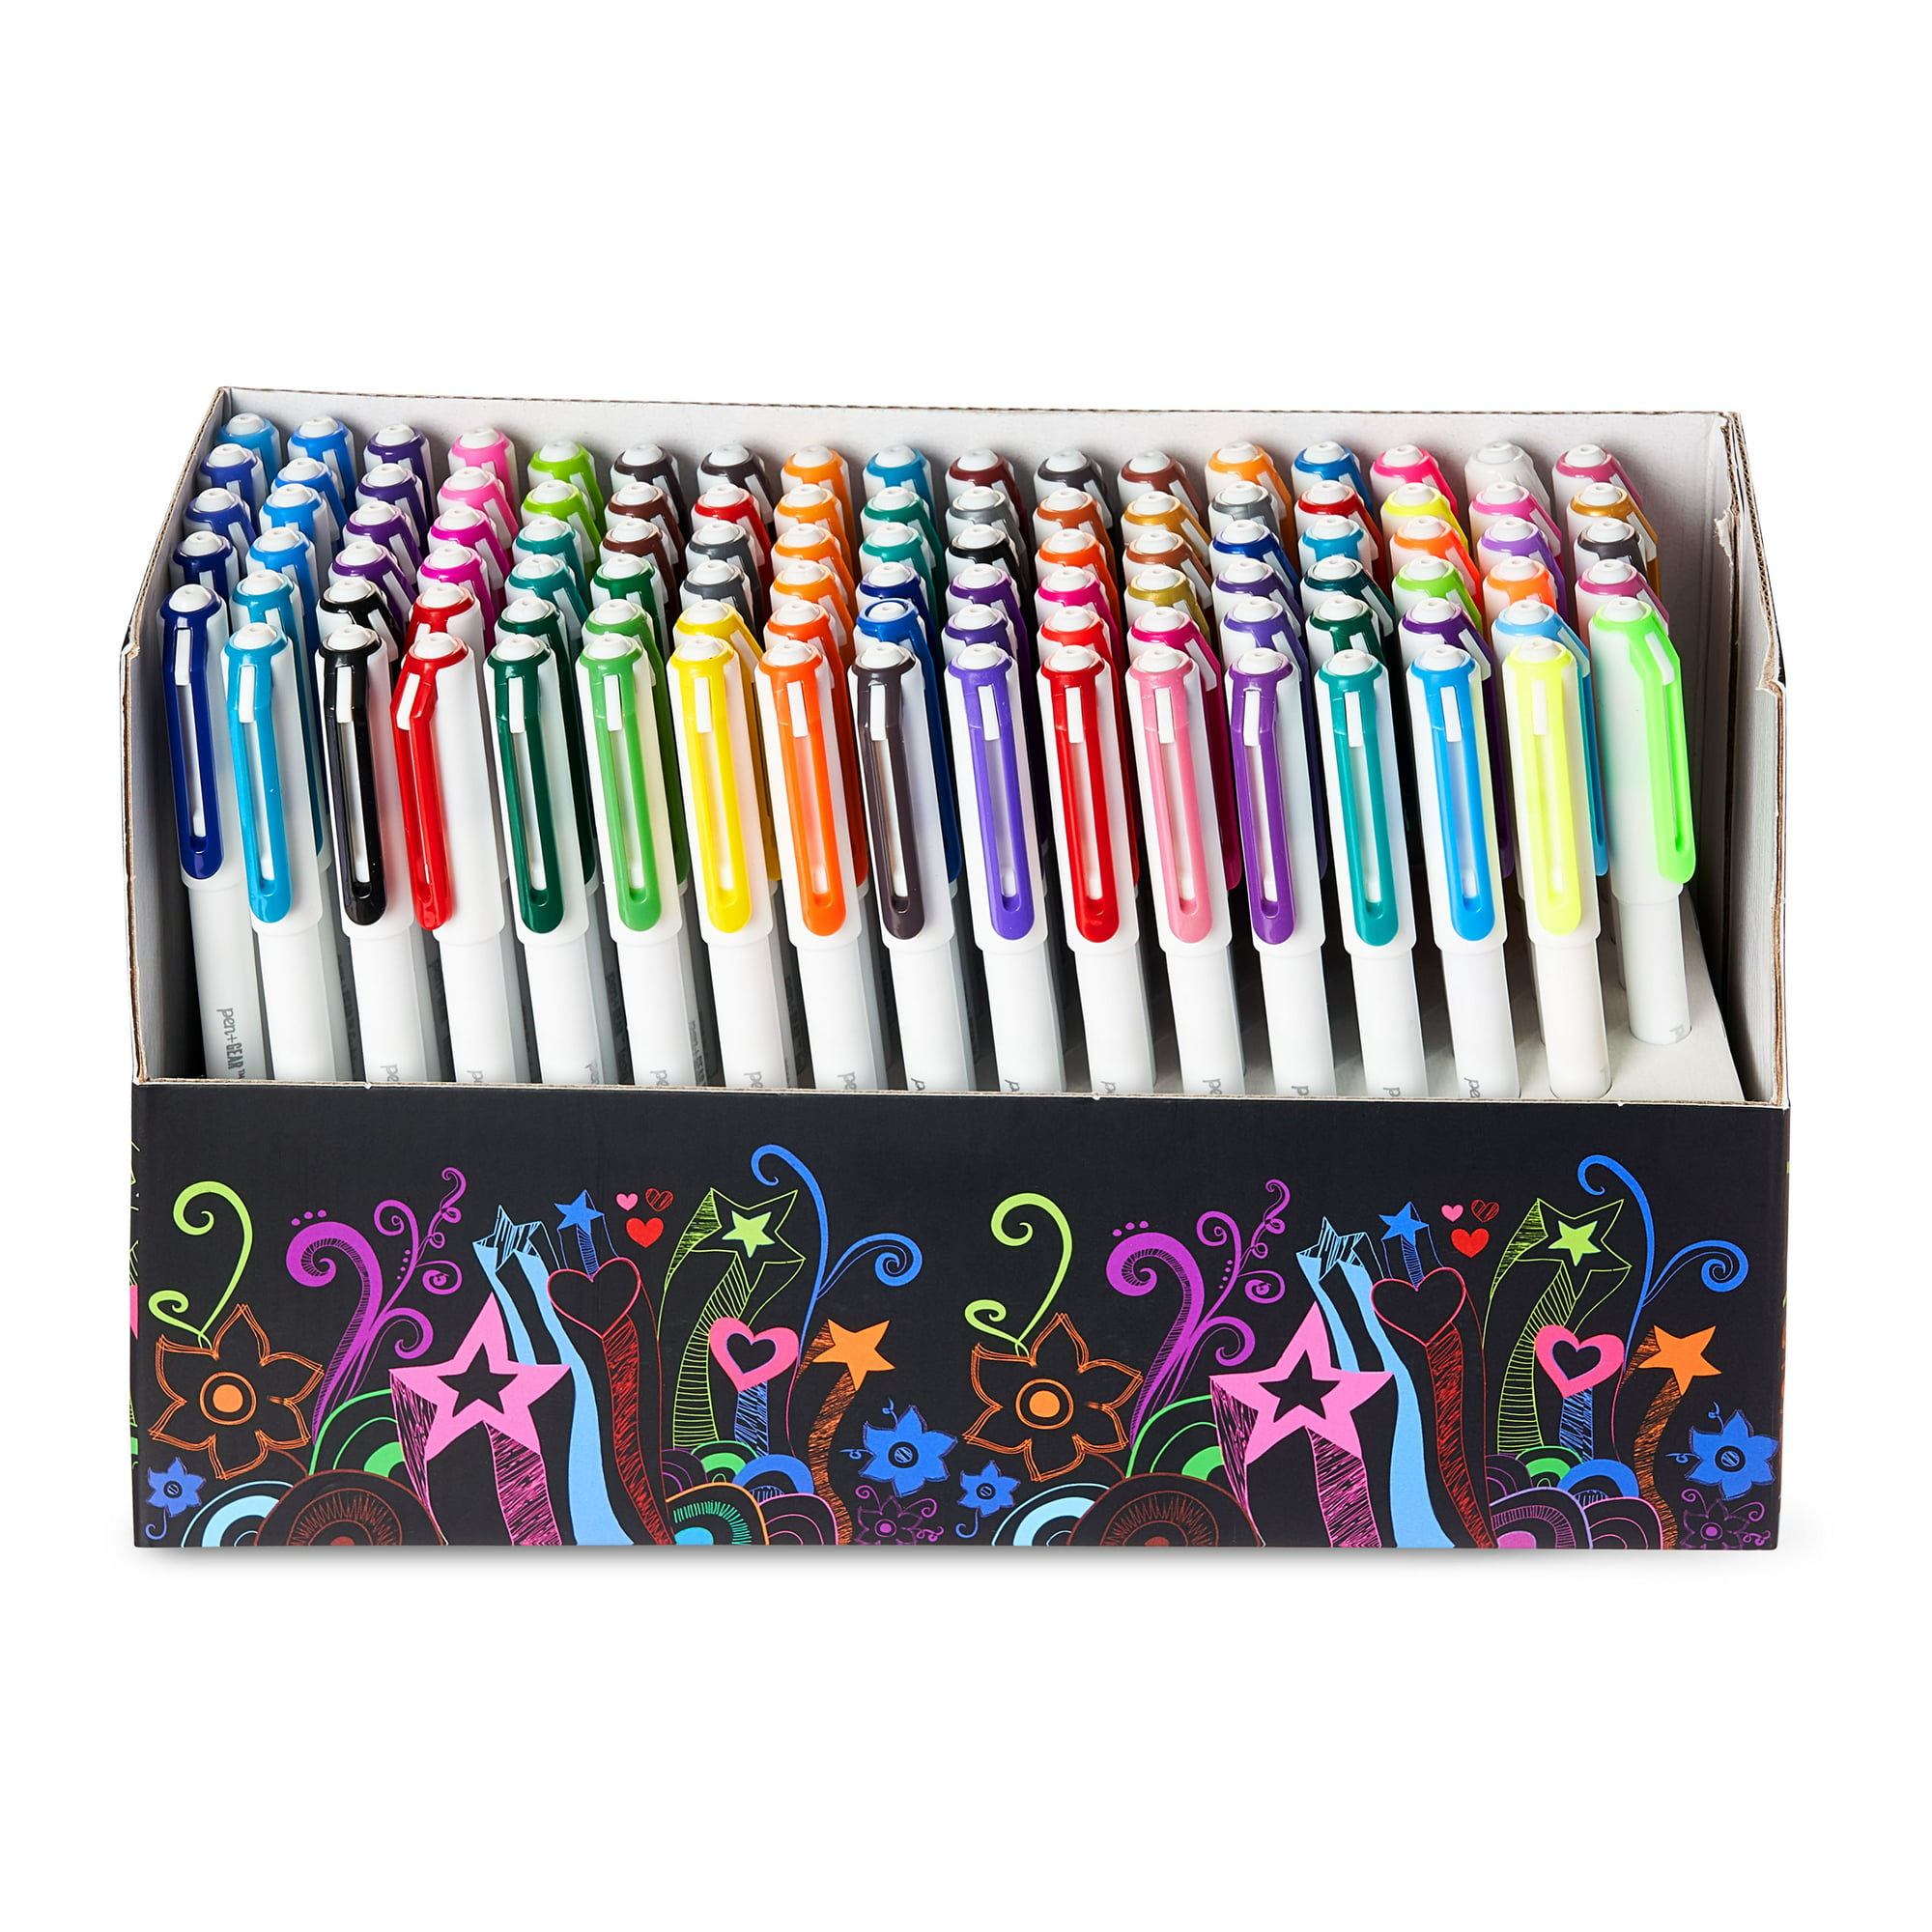 Pen+Gear:100-Count Gel Stick Pens (Assorted, Medium Point) $15, 17" x 23" Magnetic Dry Erase Board Set $7 + Free Shipping w/ Walmart+ or $35+